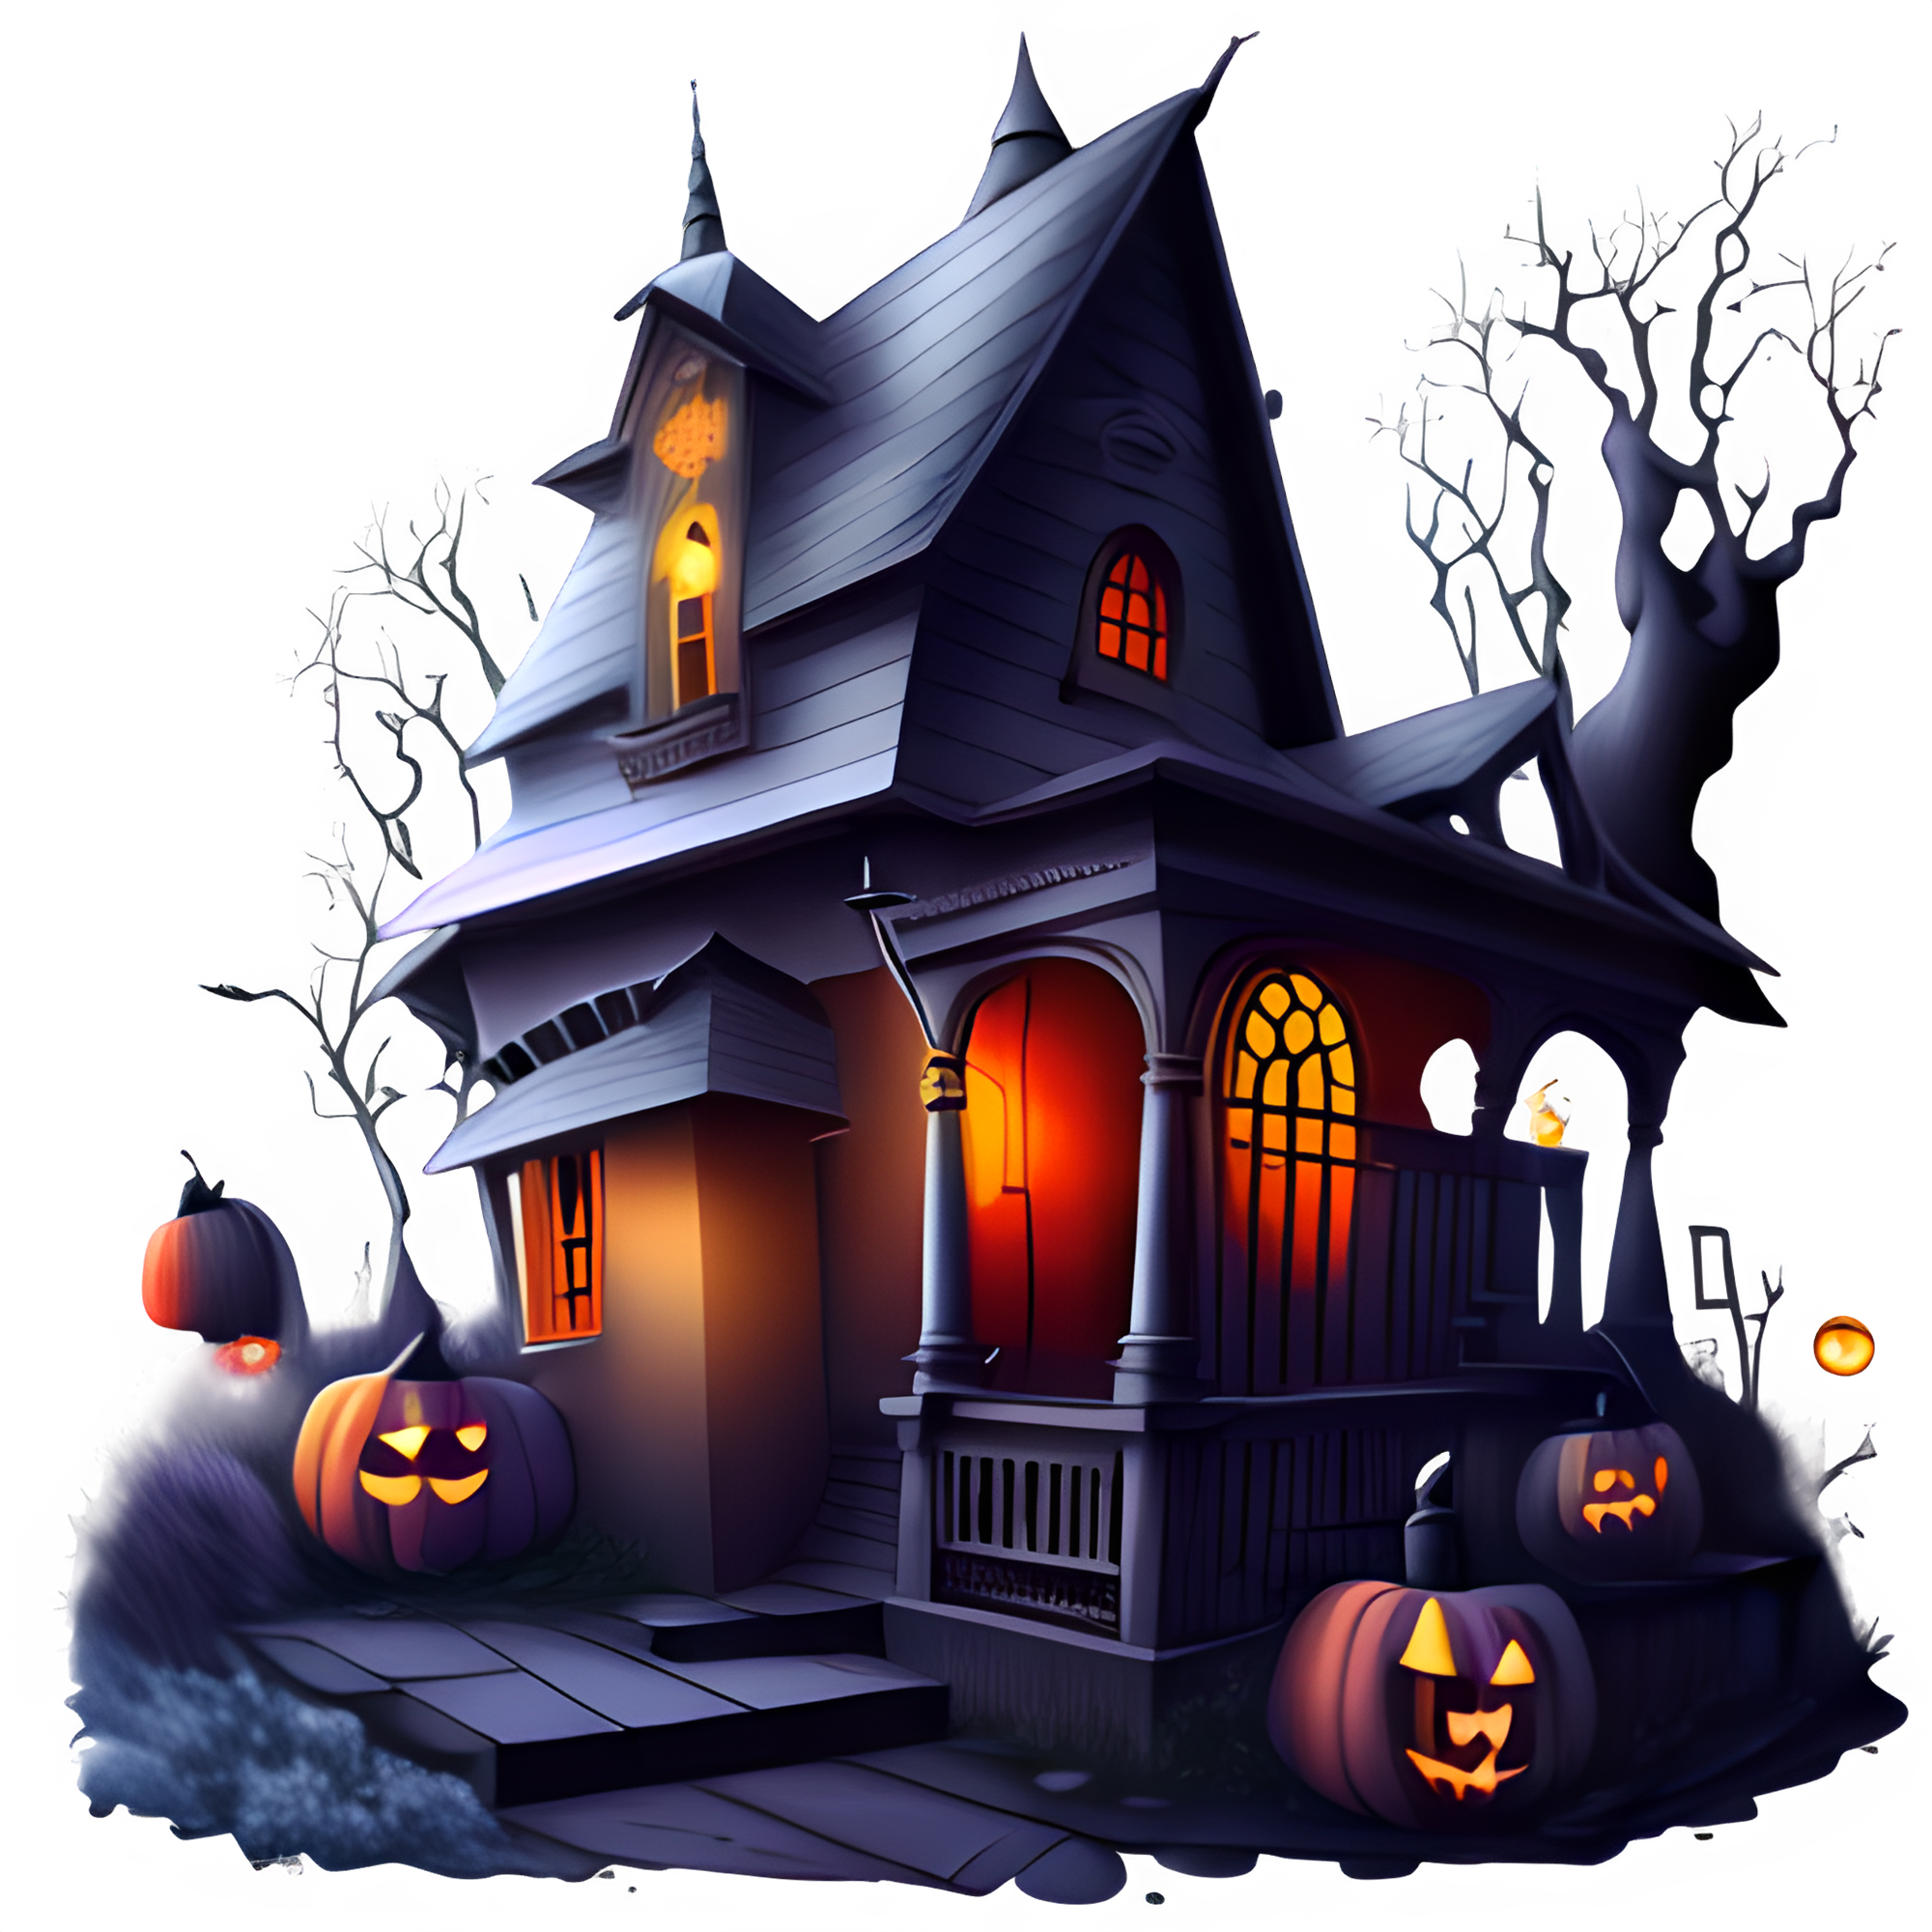 Haunted House Copyright @ Designs by Forte